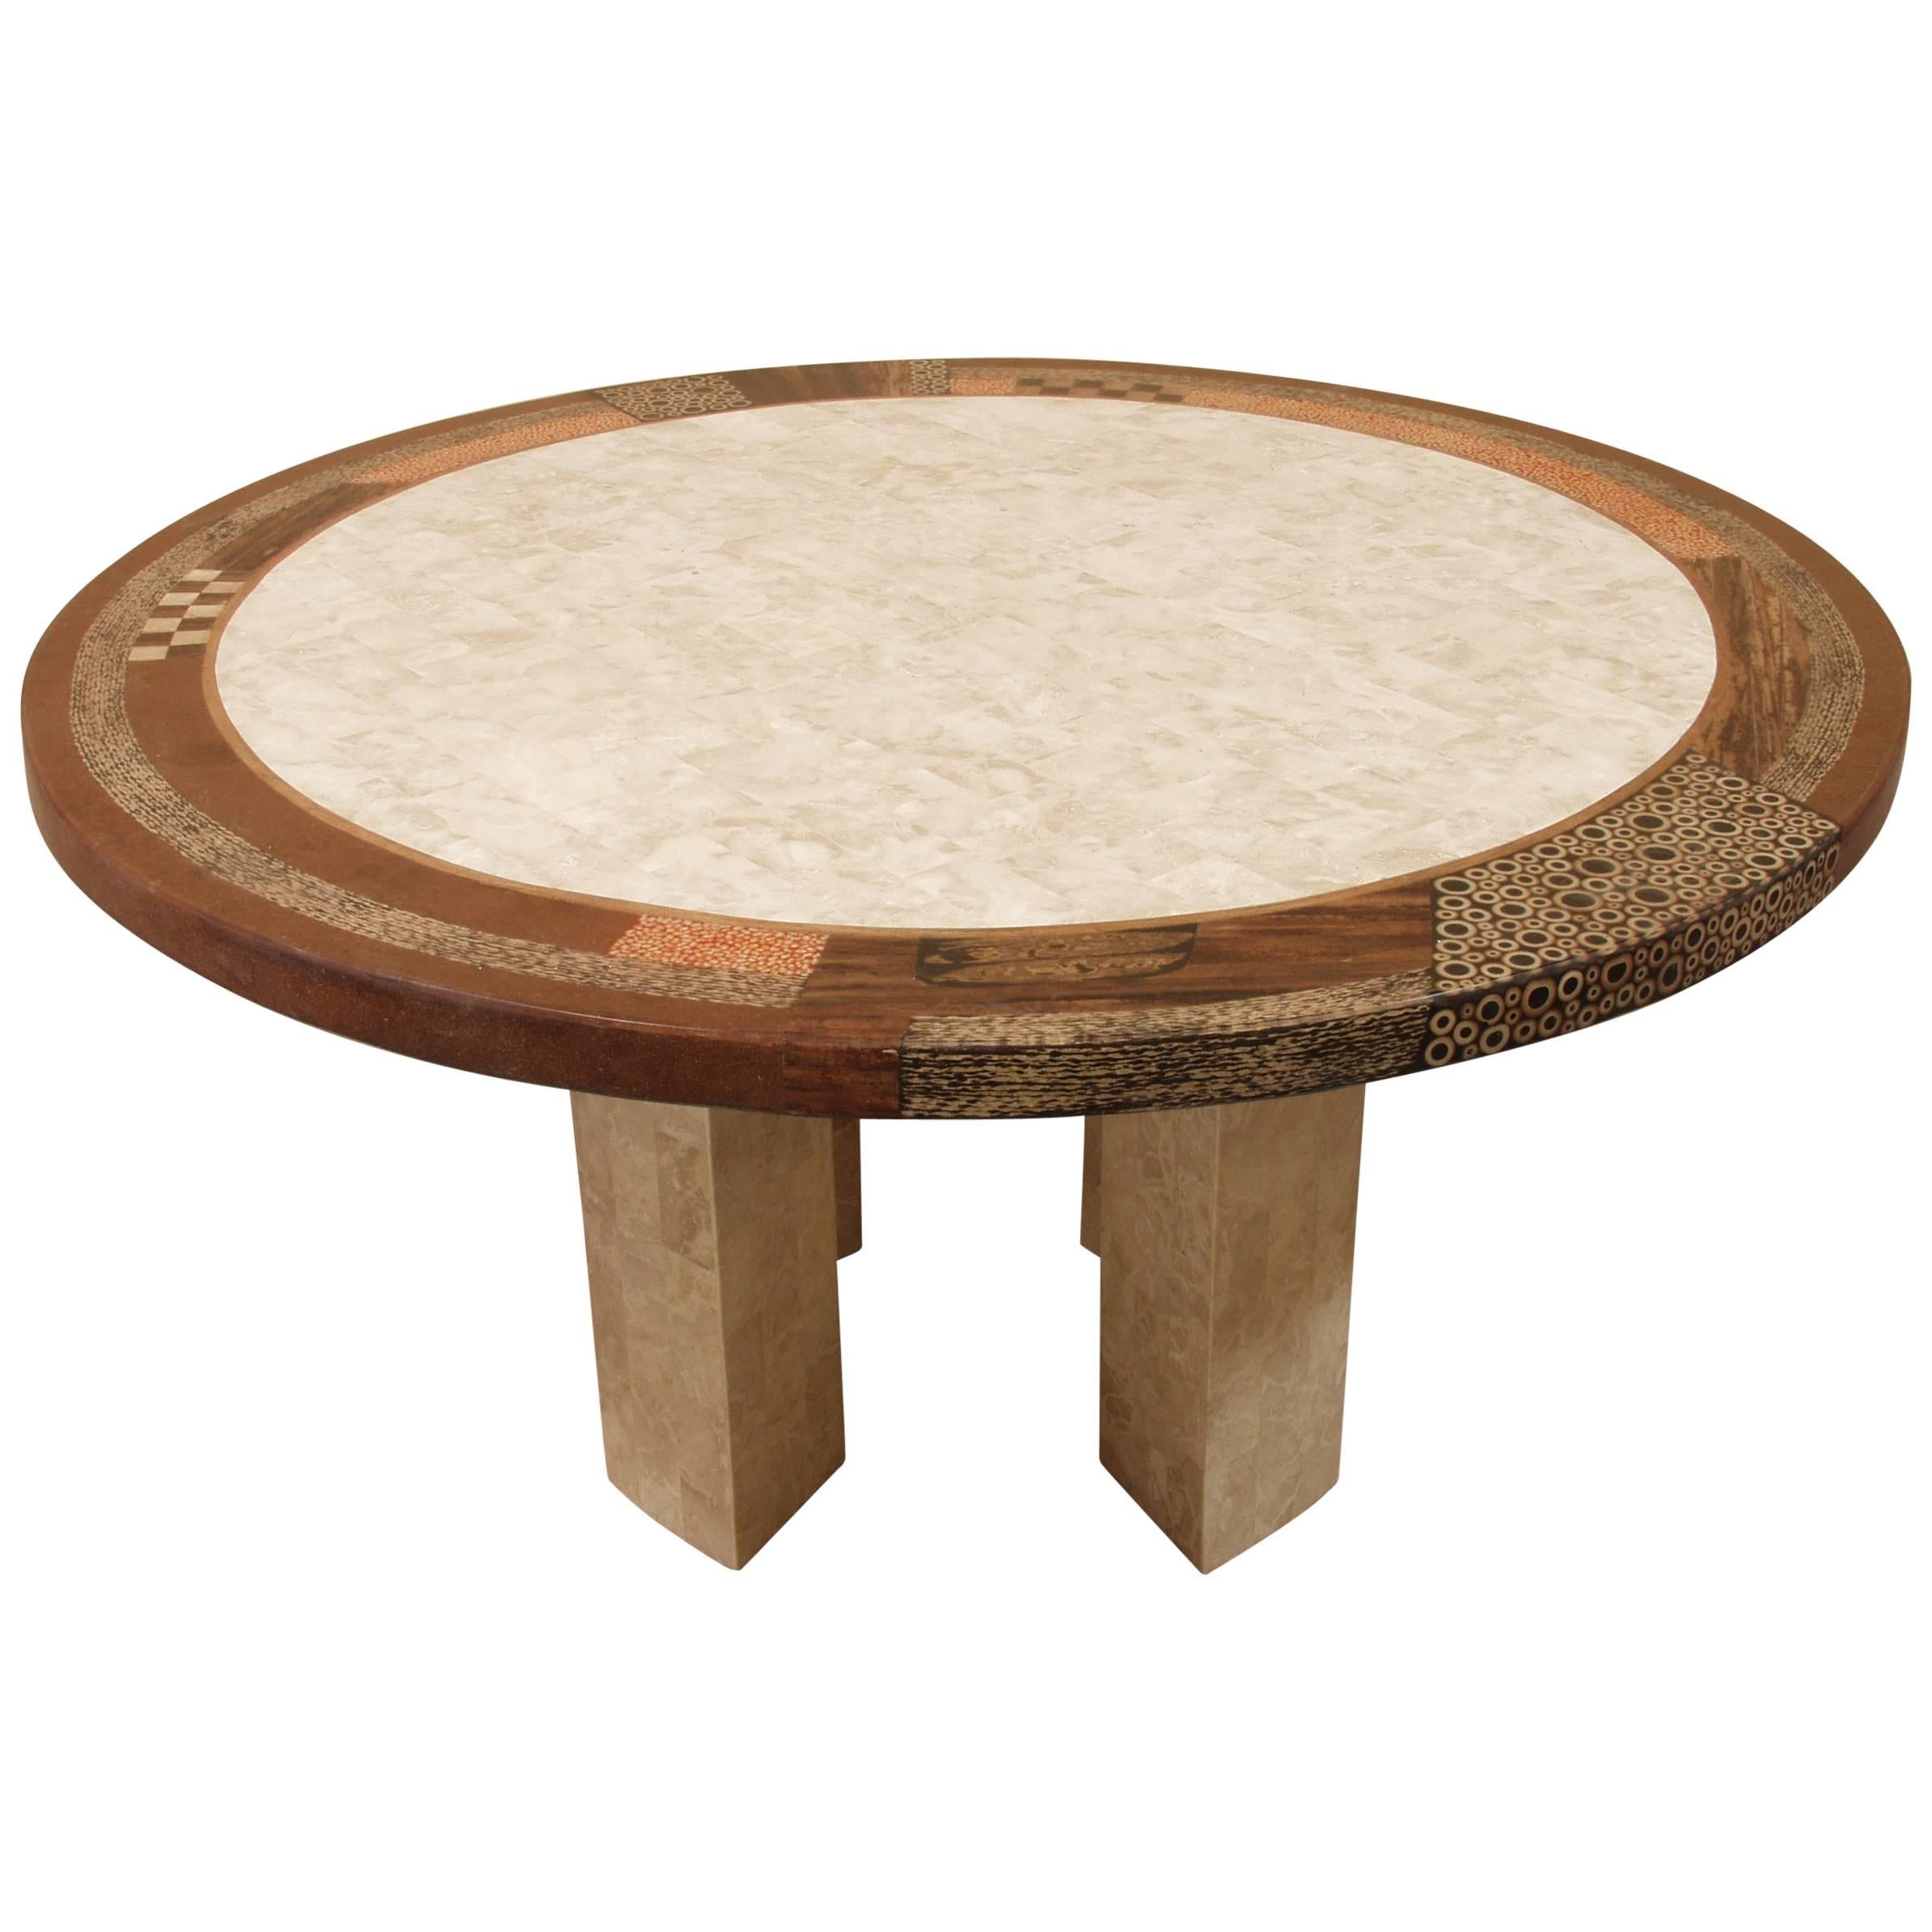 "Collage" Round Dining Table in Tessellated Stone and Natural Materials, 1990s For Sale